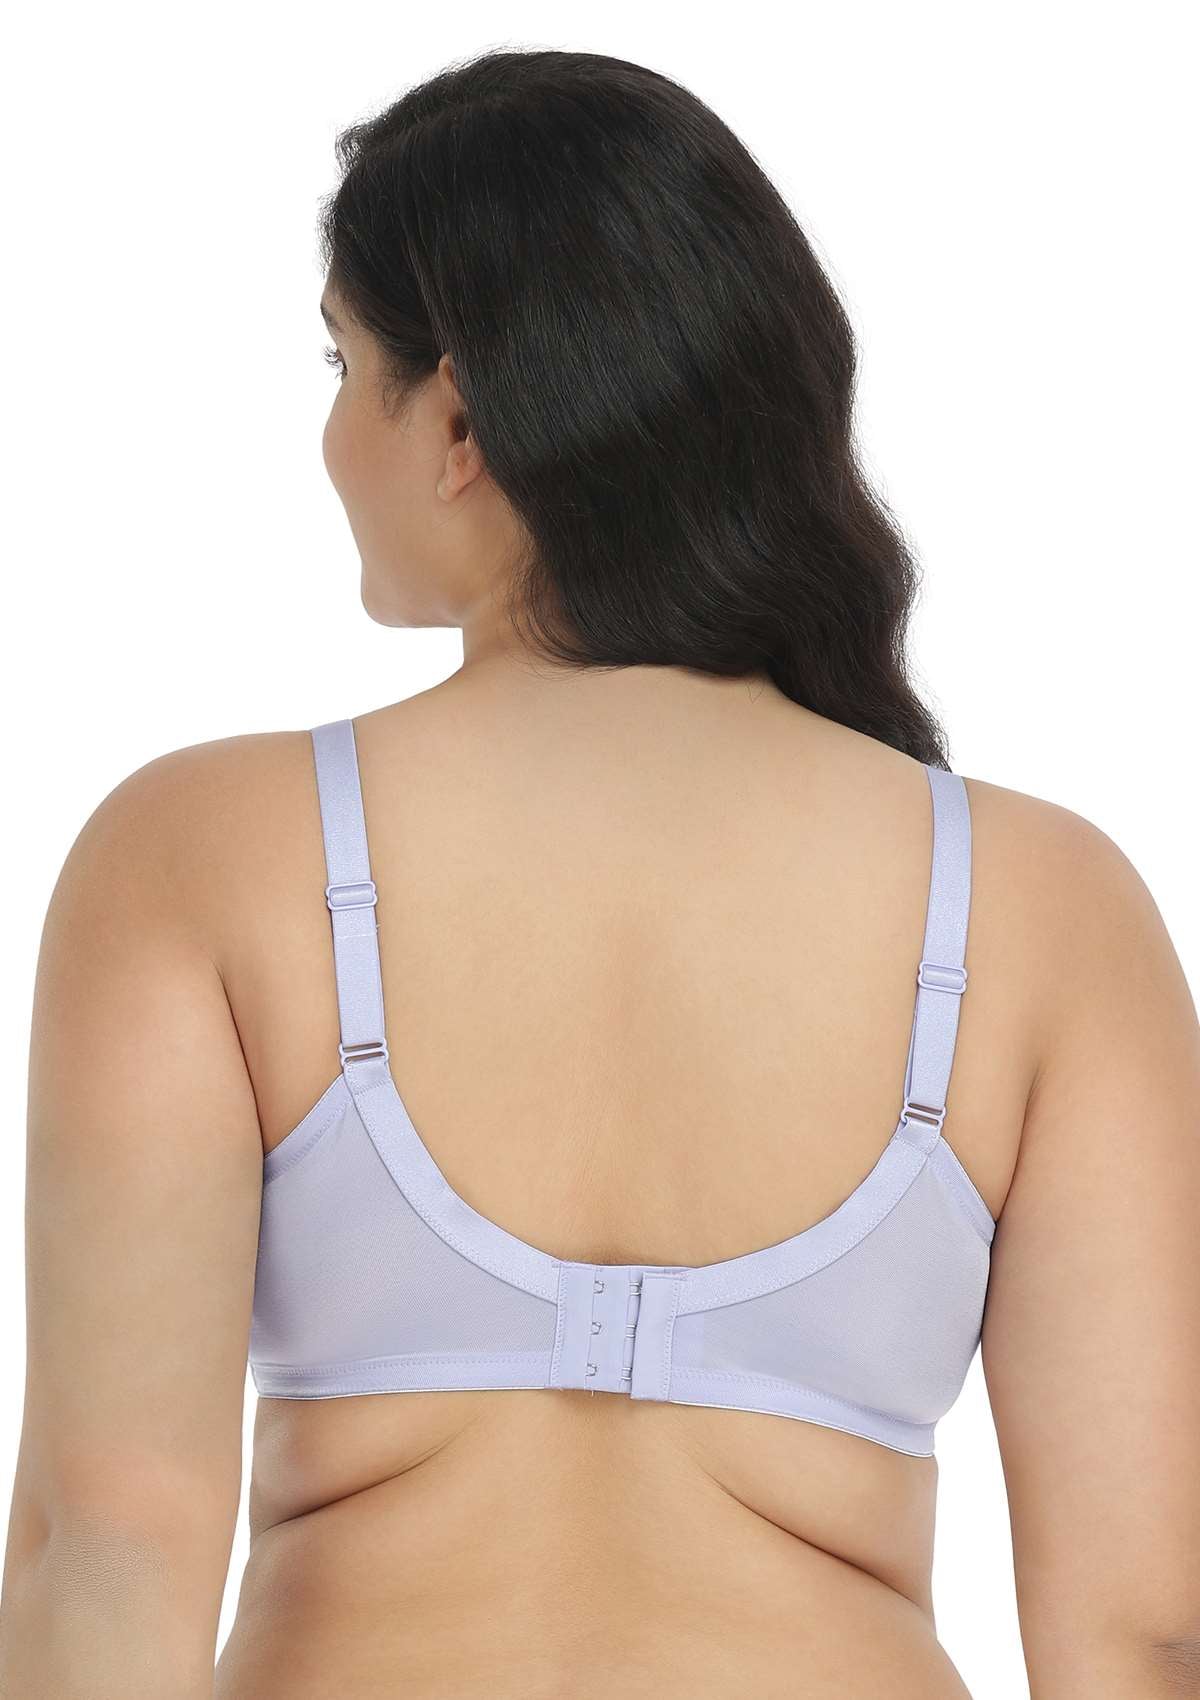 HSIA Wisteria Bra For Lift And Support - Full Coverage Minimizer Bra - Crystal Blue / 34 / C